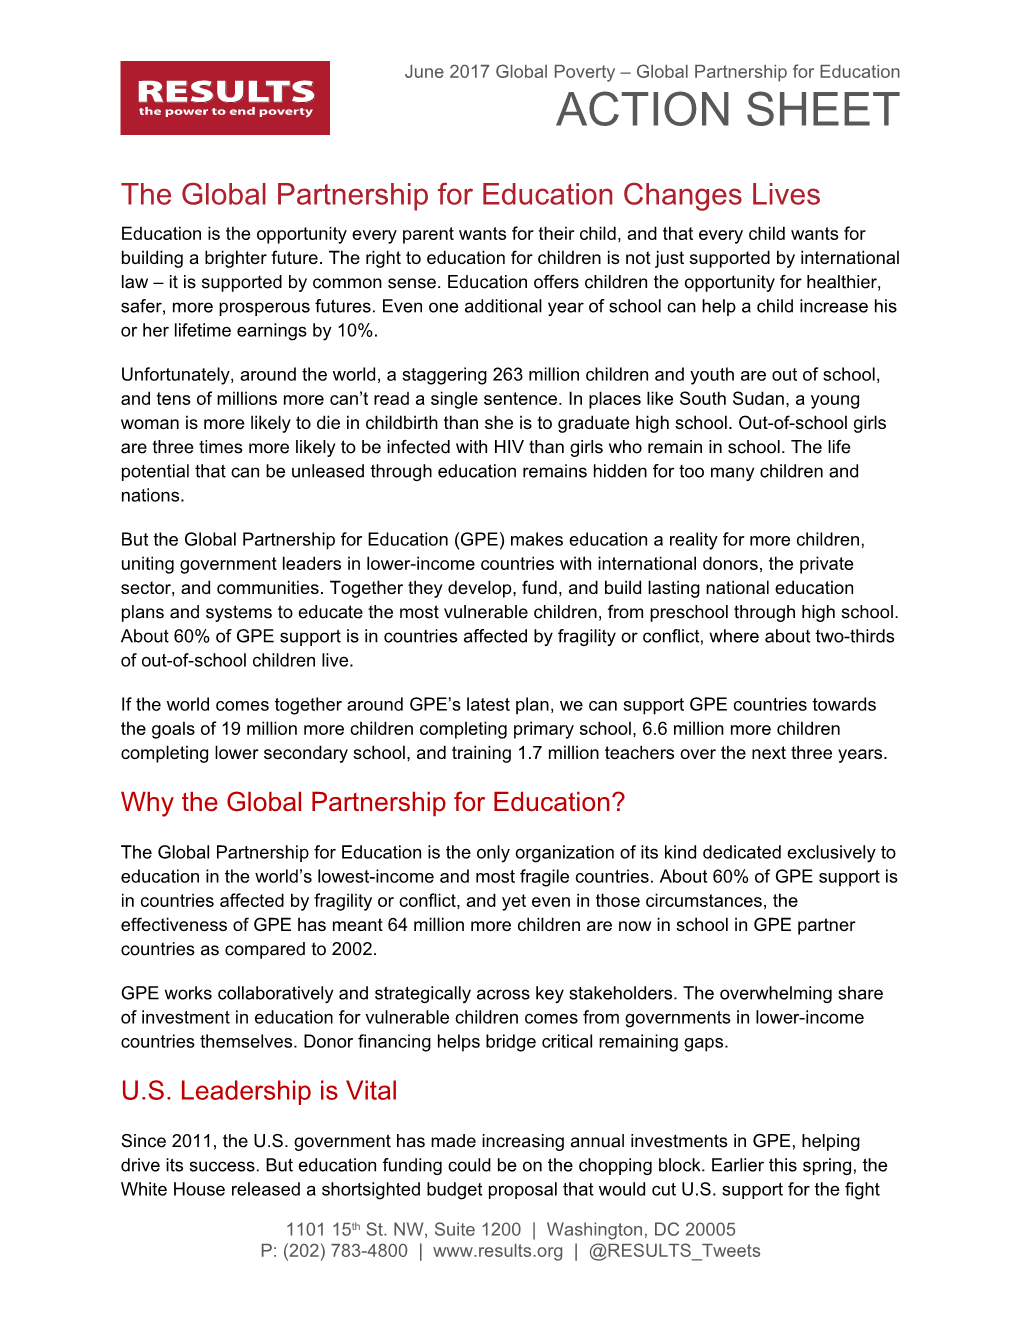 The Global Partnership for Education Changes Lives